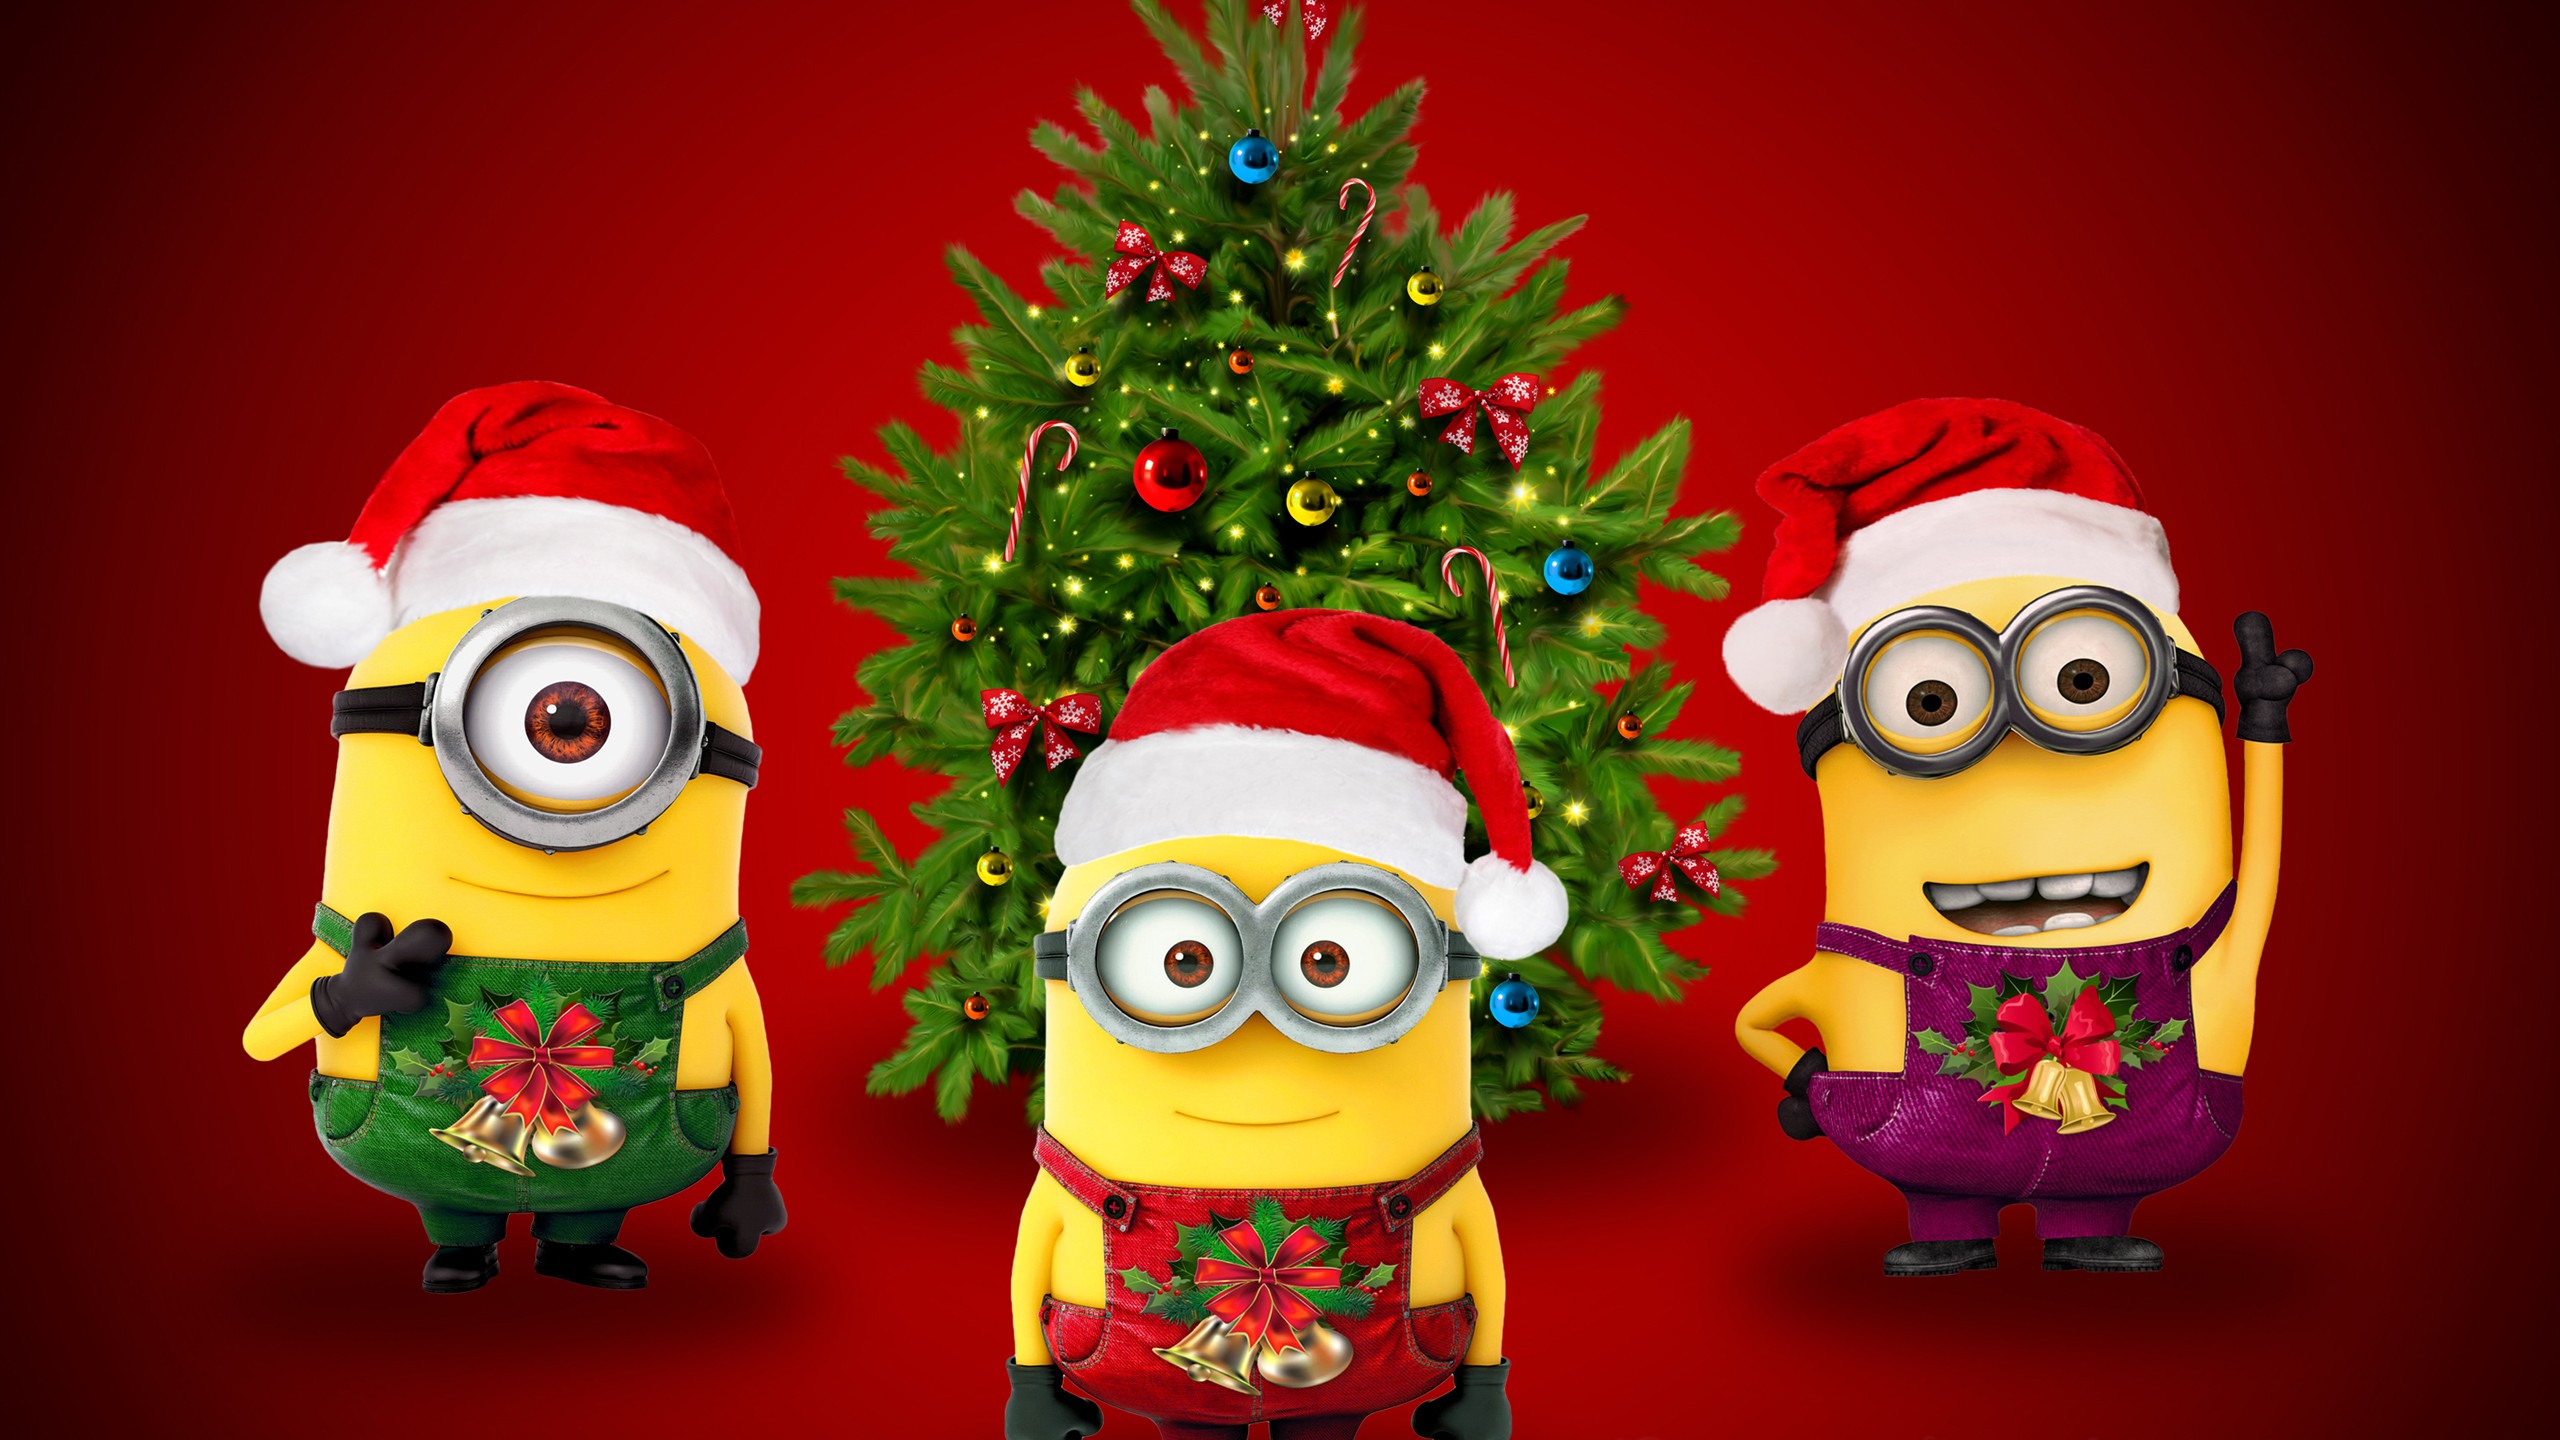 General 2560x1440 Christmas minions red background holiday Santa hats